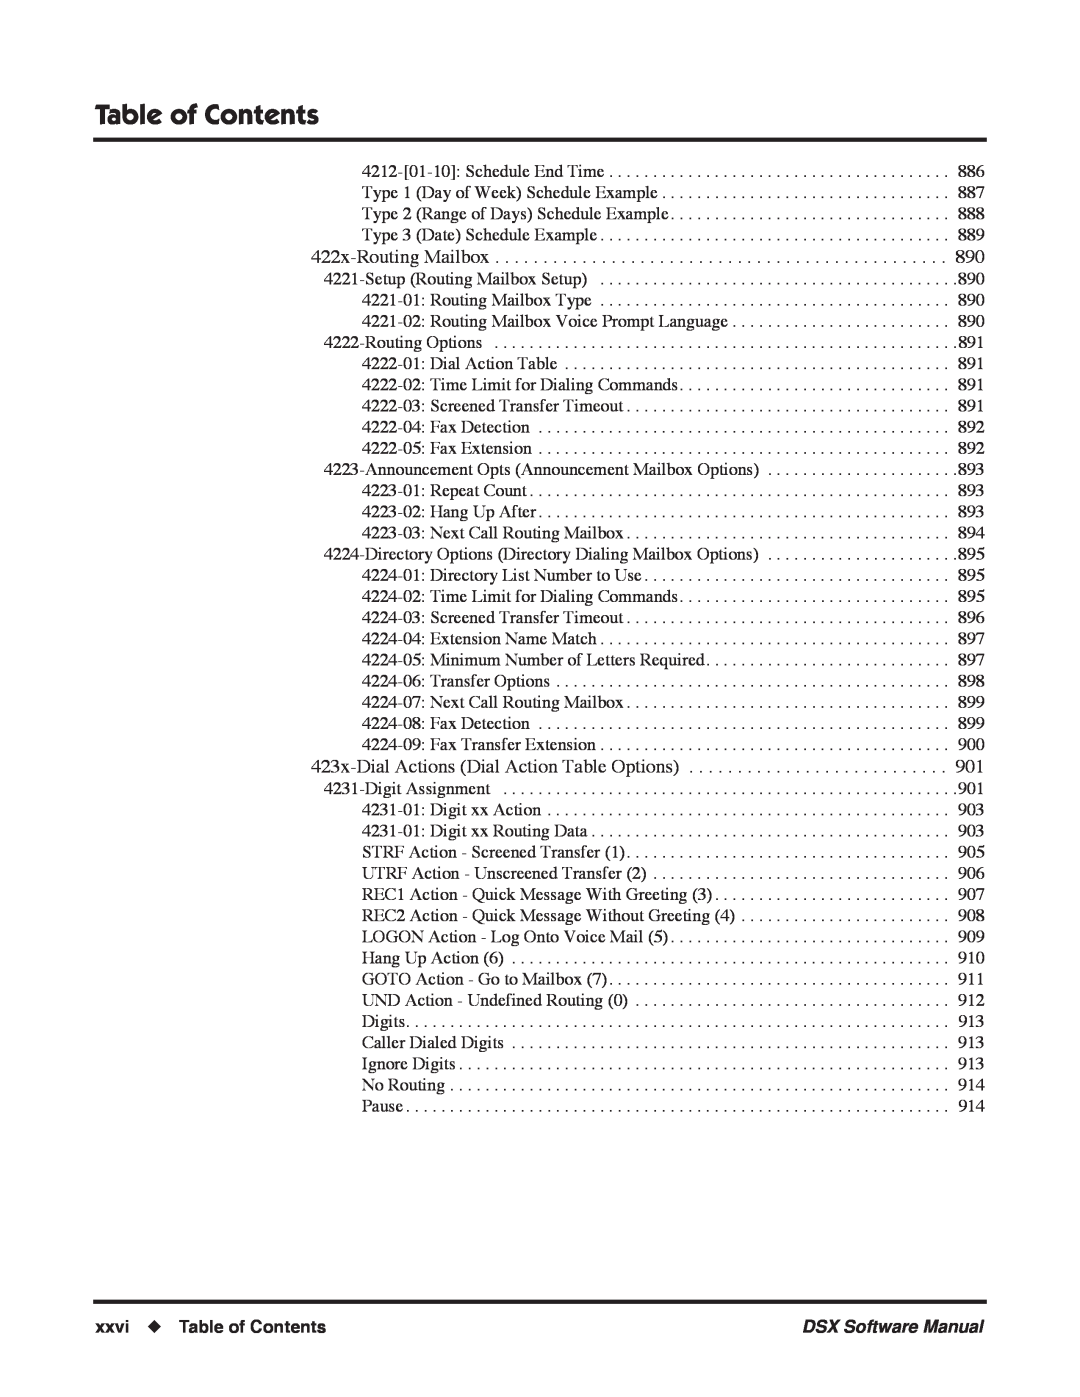 NEC N 1093100, P software manual xxvi Table of Contents 